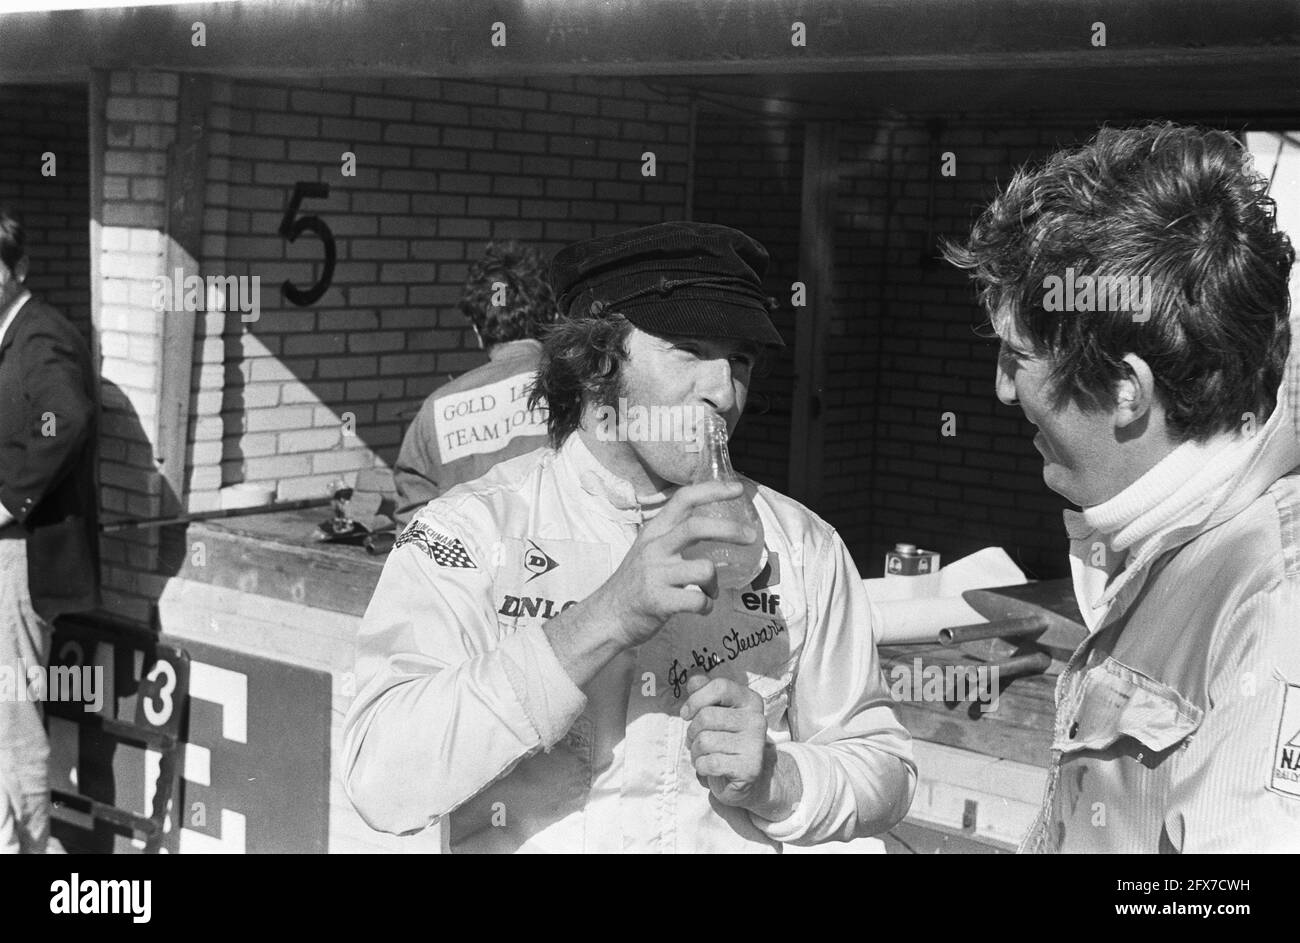 Jackie Stewart drinking a bottle of lemonade, June 19, 1969, auto drivers, bottles, The Netherlands, 20th century press agency photo, news to remember, documentary, historic photography 1945-1990, visual stories, human history of the Twentieth Century, capturing moments in time Stock Photo